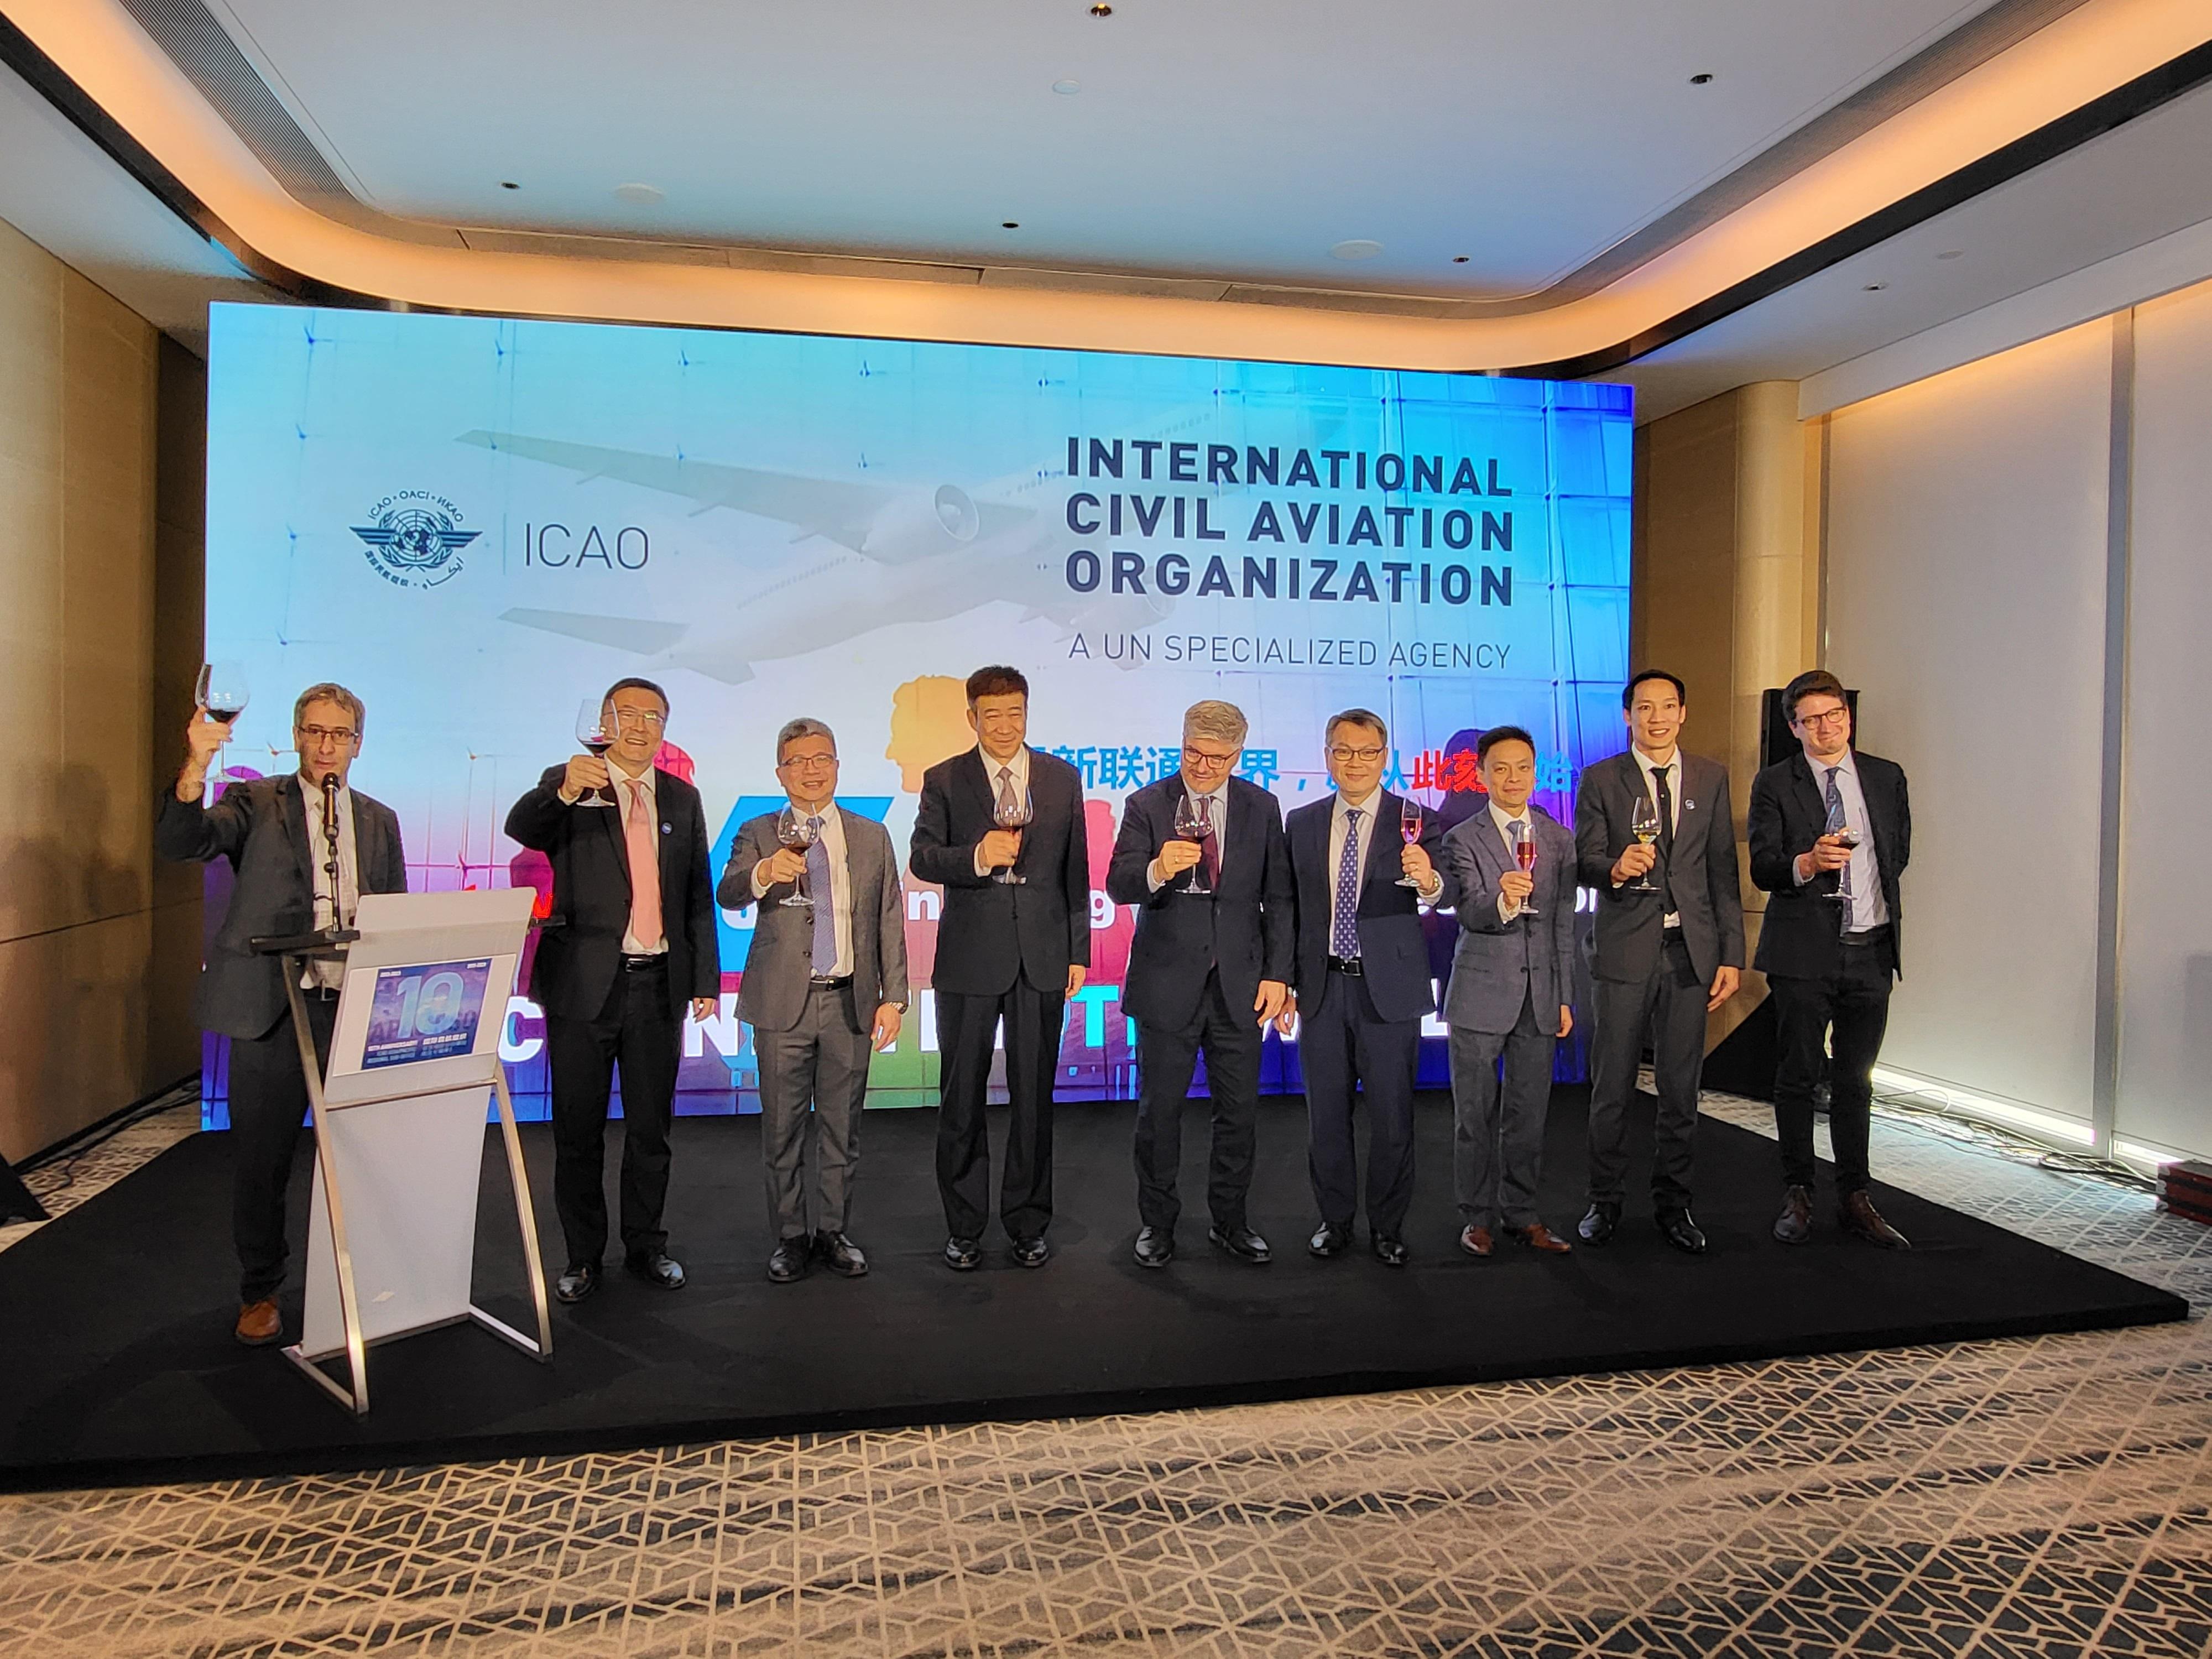 The Director-General of Civil Aviation, Mr Victor Liu (fourth right), is invited to attend the 10th anniversary ceremony of the International Civil Aviation Organization Asia and Pacific Regional Sub-Office in Beijing today (June 6).